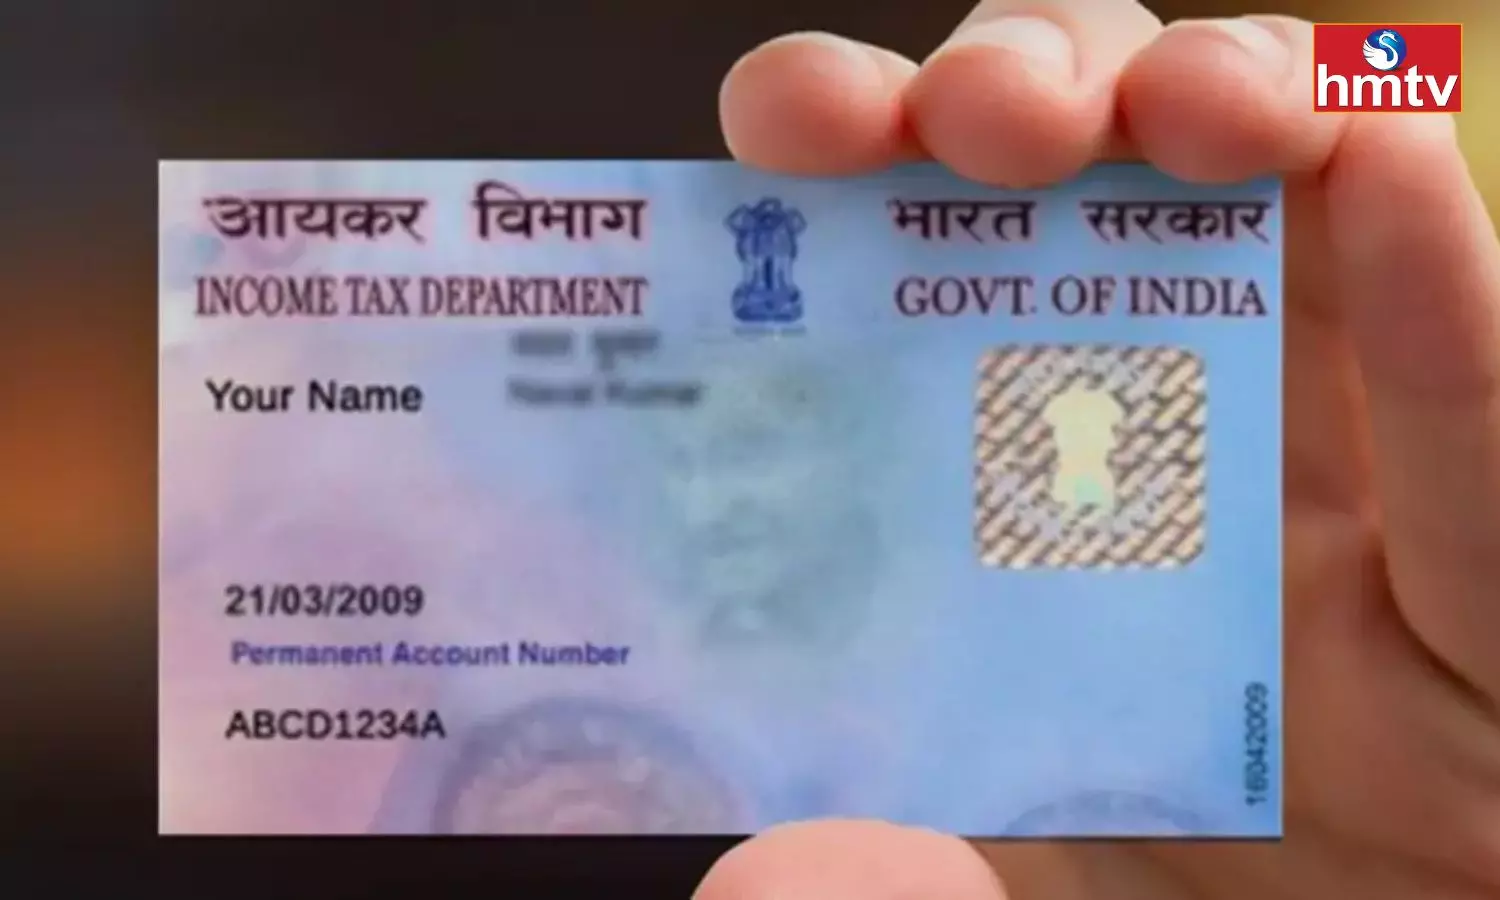 The Income Tax Department has tweeted that PAN card holders should be linked with Aadhaar by March 31, 2023